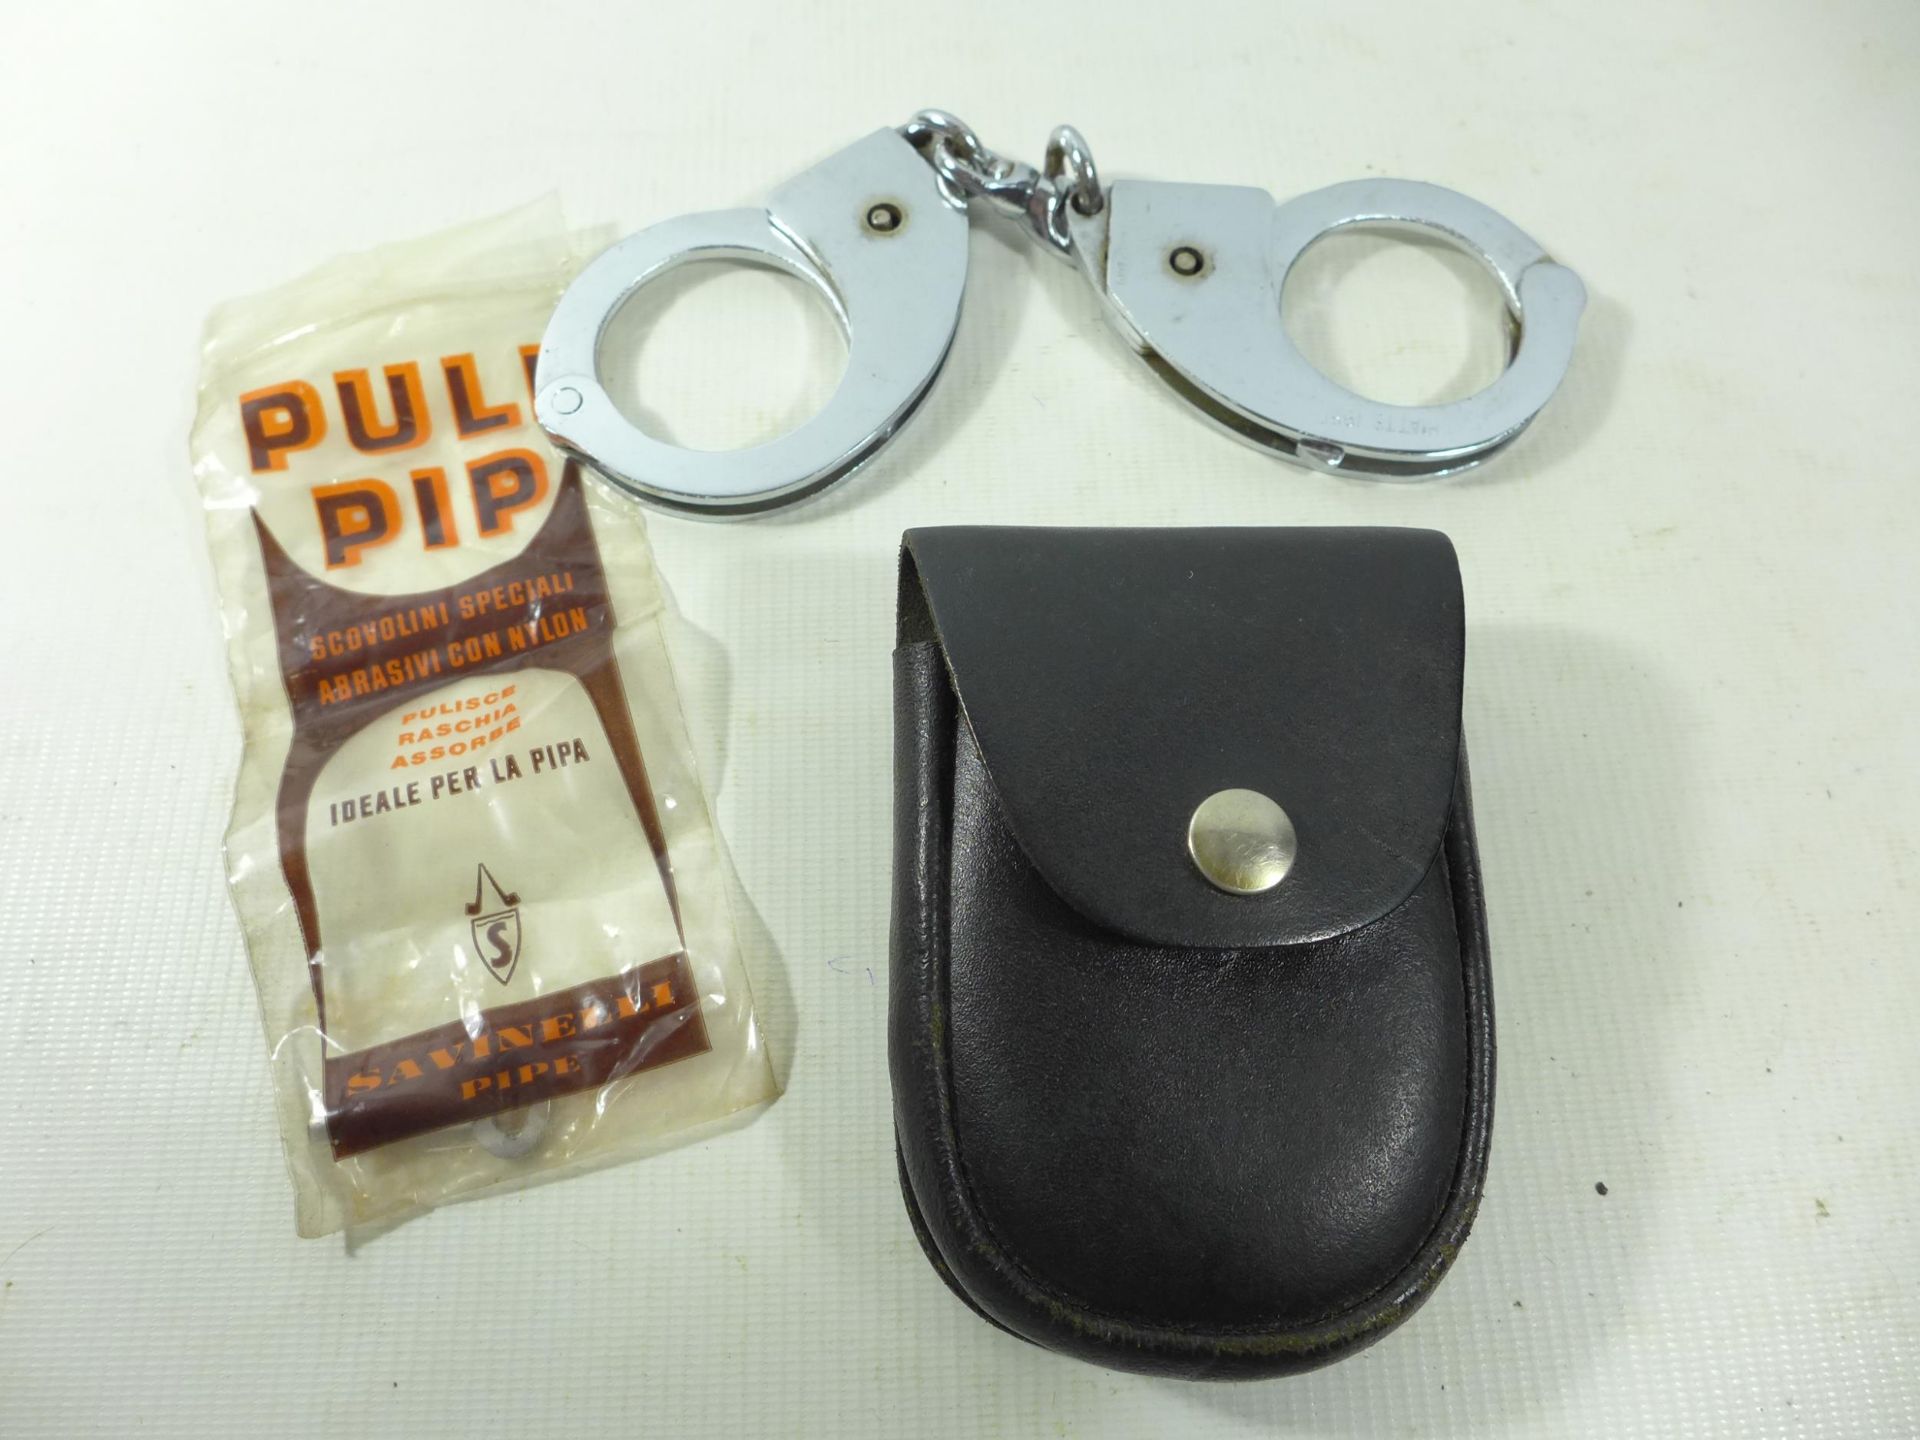 A PAIR OF HANDCUFFS, KEY AND POUCH